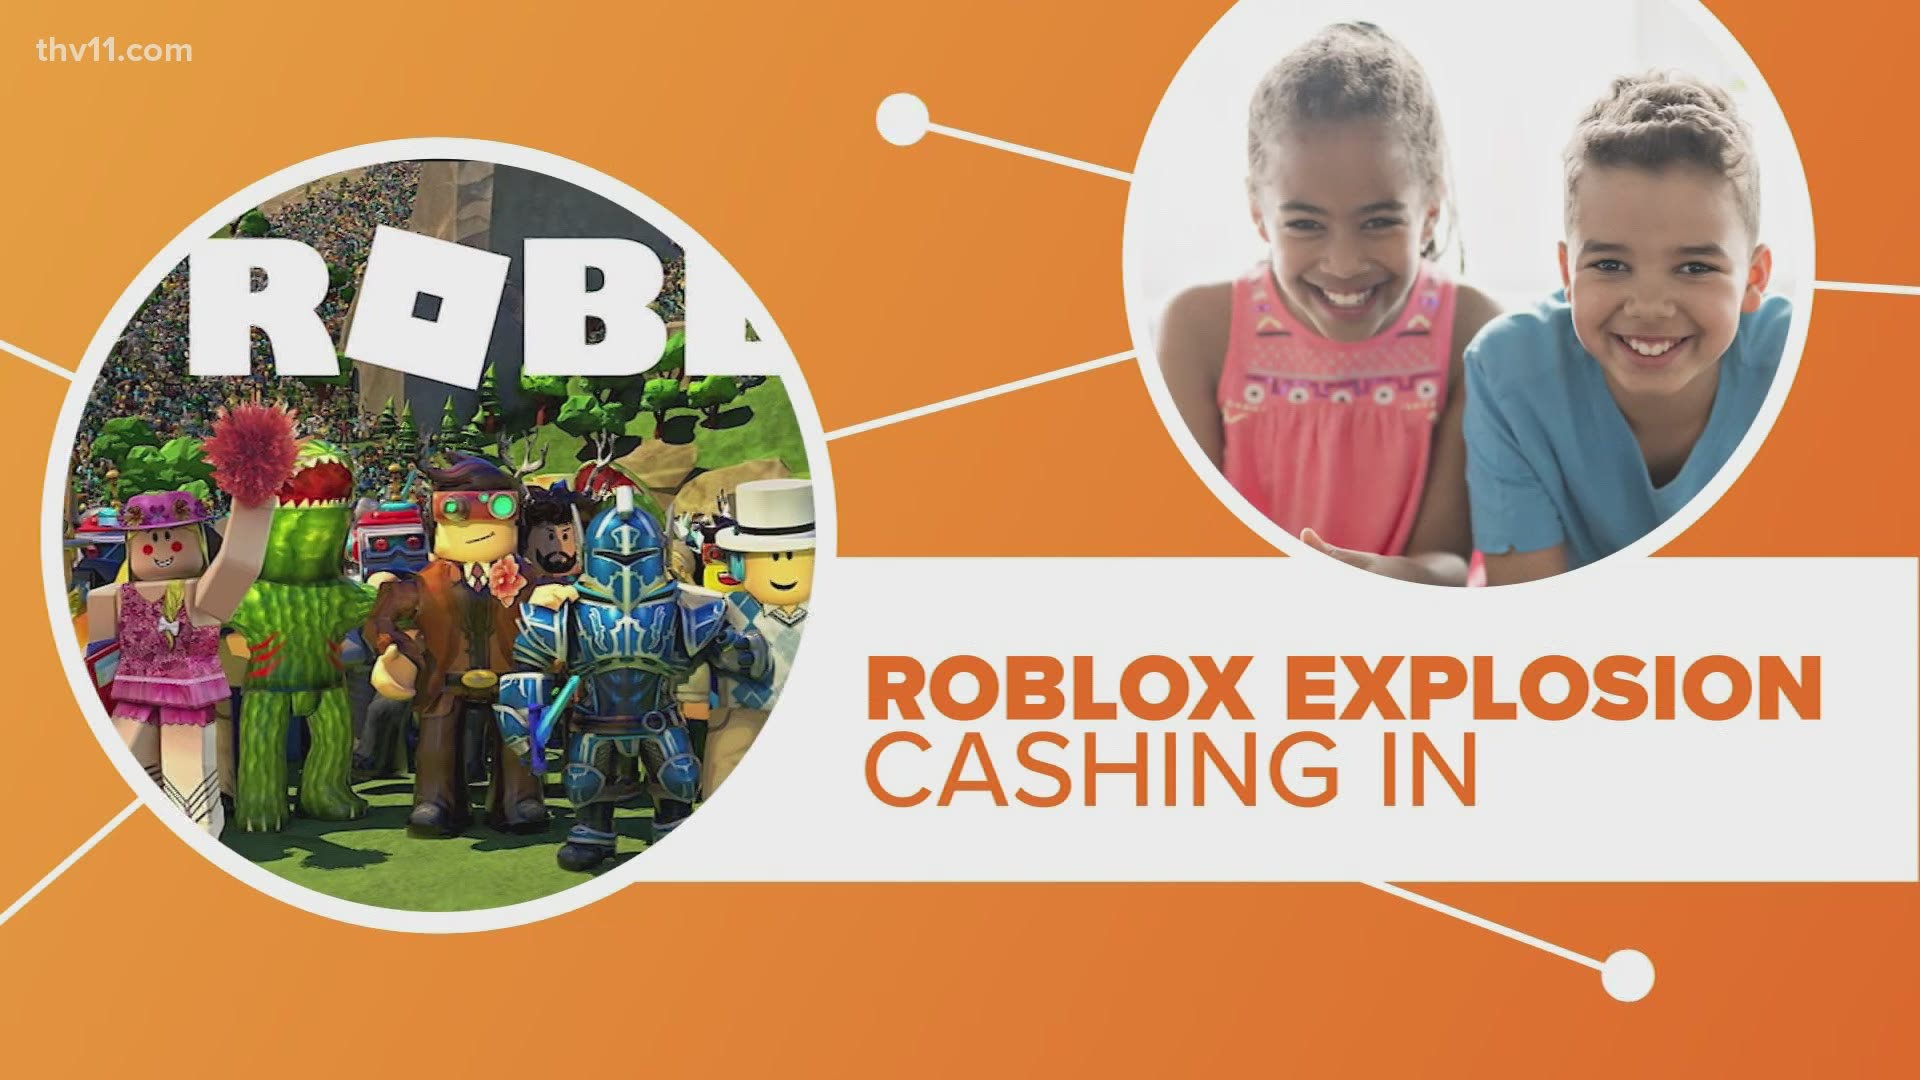 Should You Buy Roblox Stock Right Now?